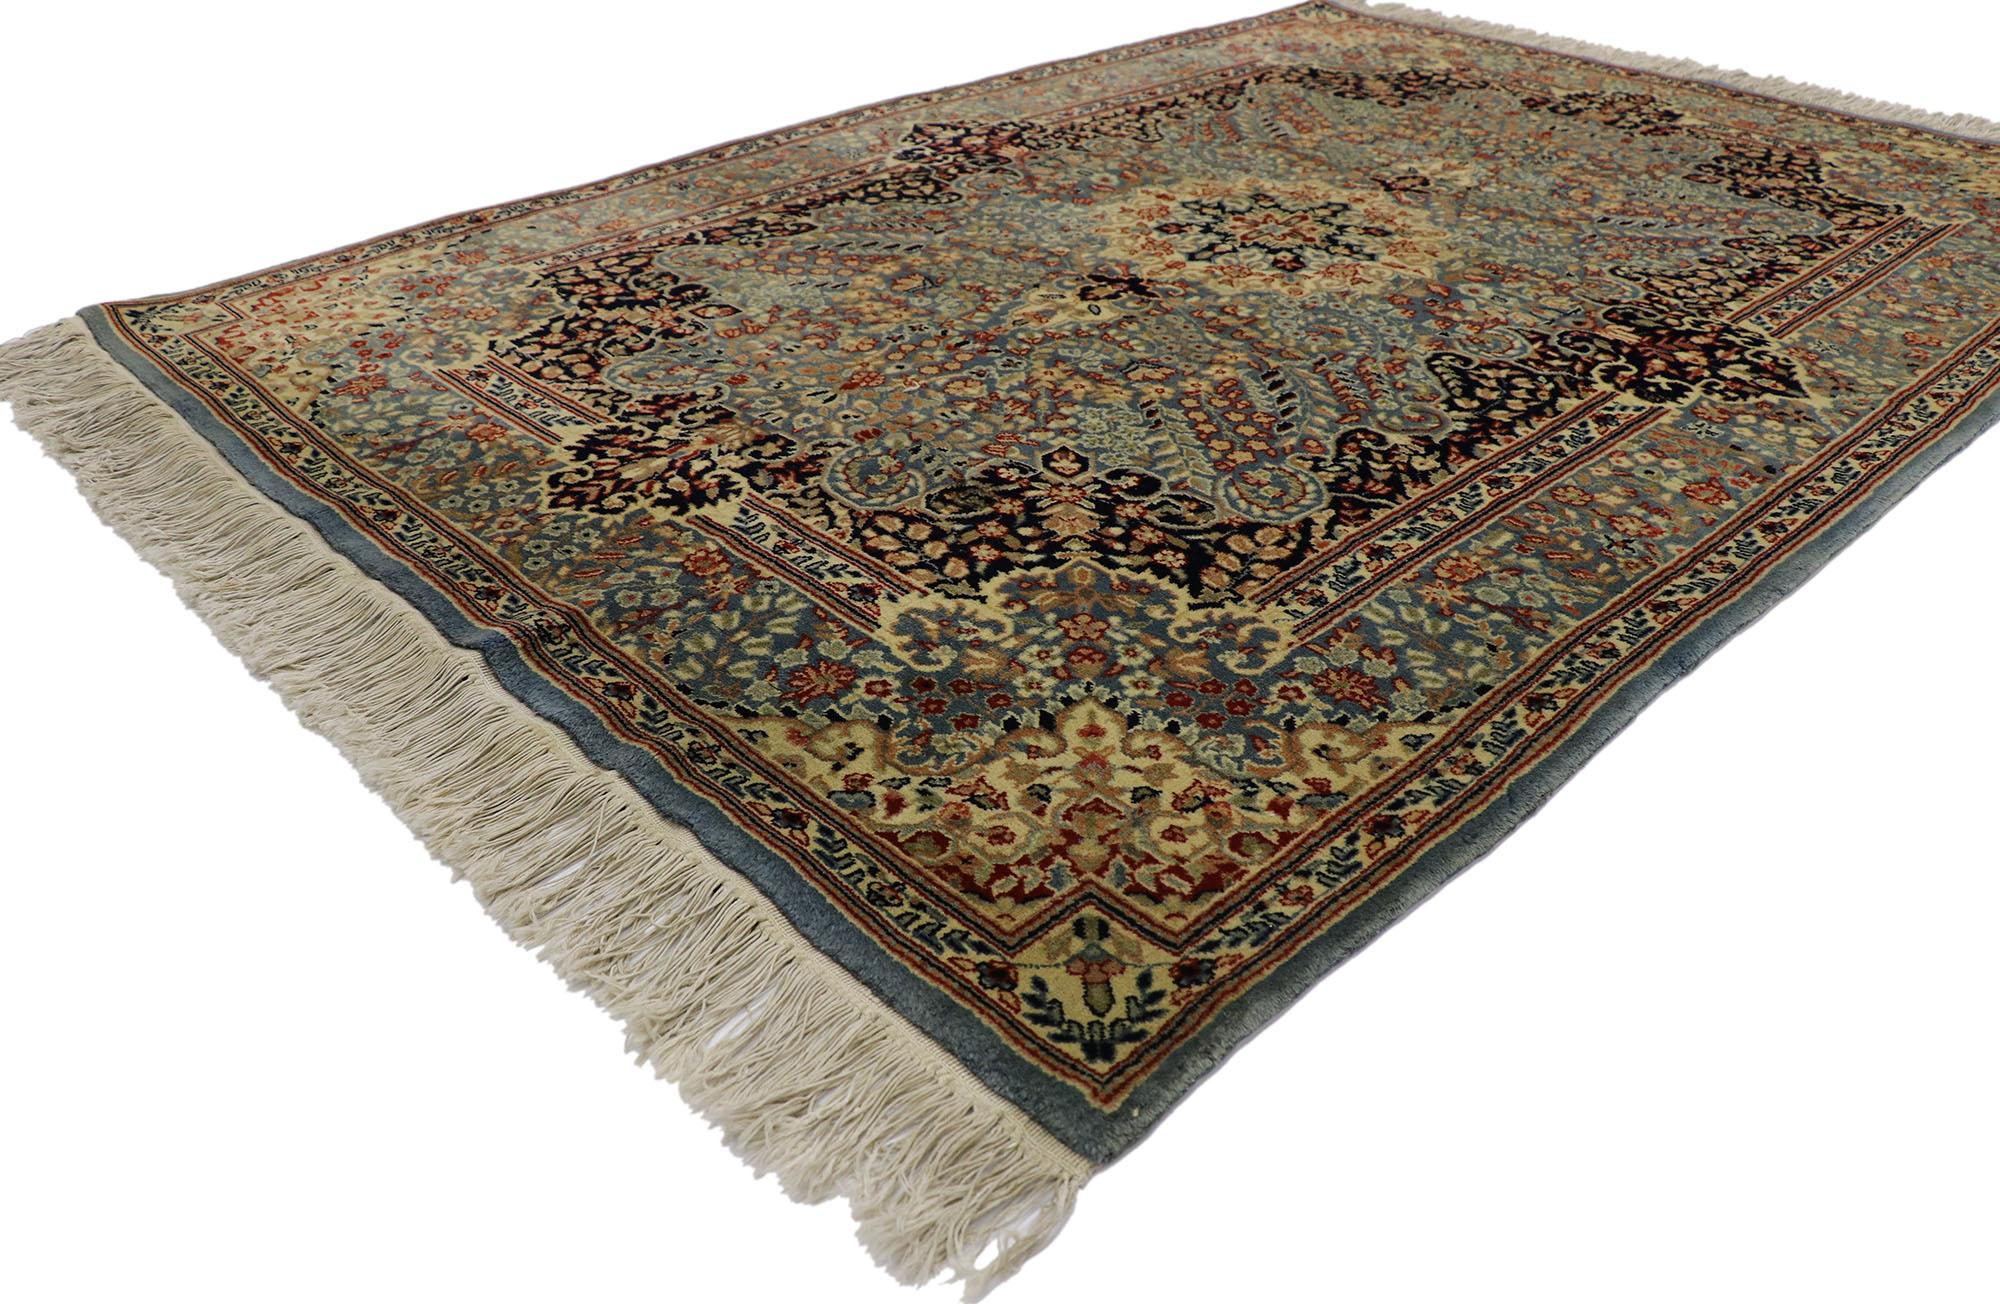 21681 Antique Persian Kerman rug with Victorian Style 04'07 x 06'07. Sophisticated and refined with a Victorian style, this hand knotted wool antique Persian Kerman rug charms with ease. Taking center stage is a concentric eight-point cusped